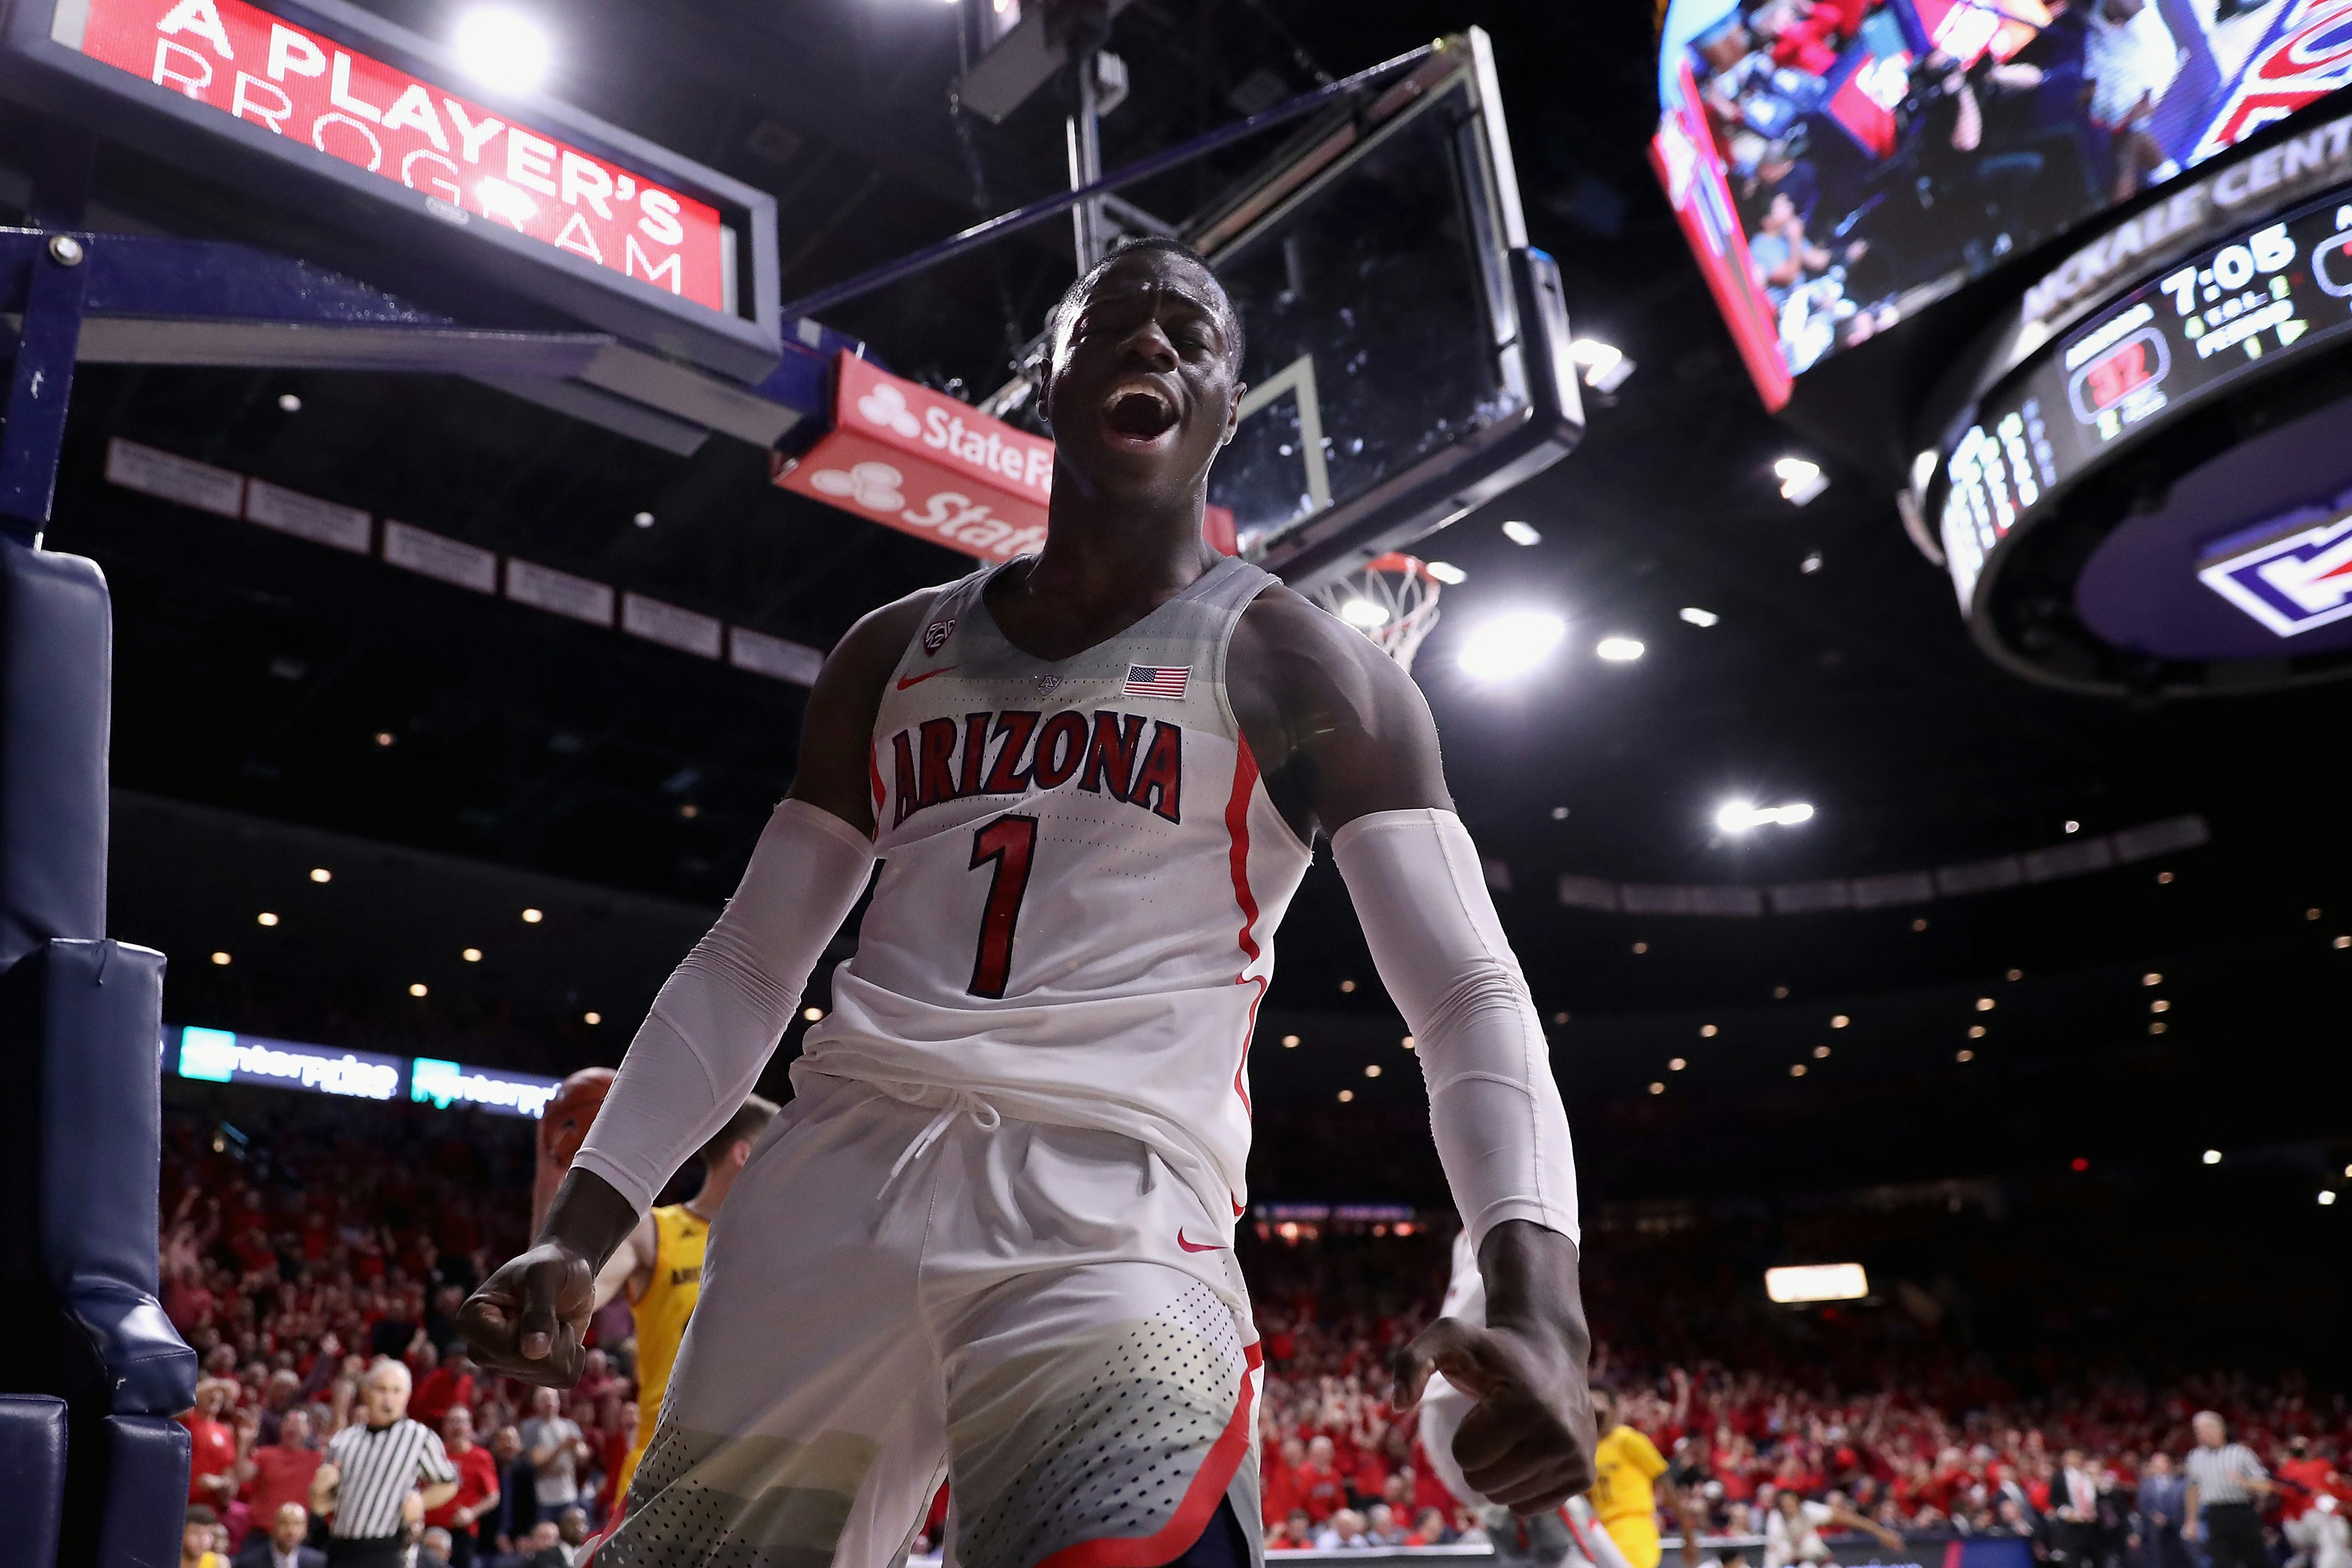 Arizona Basketball Top 5 Red and Blue Game Dunk Contest Dunks since 2010